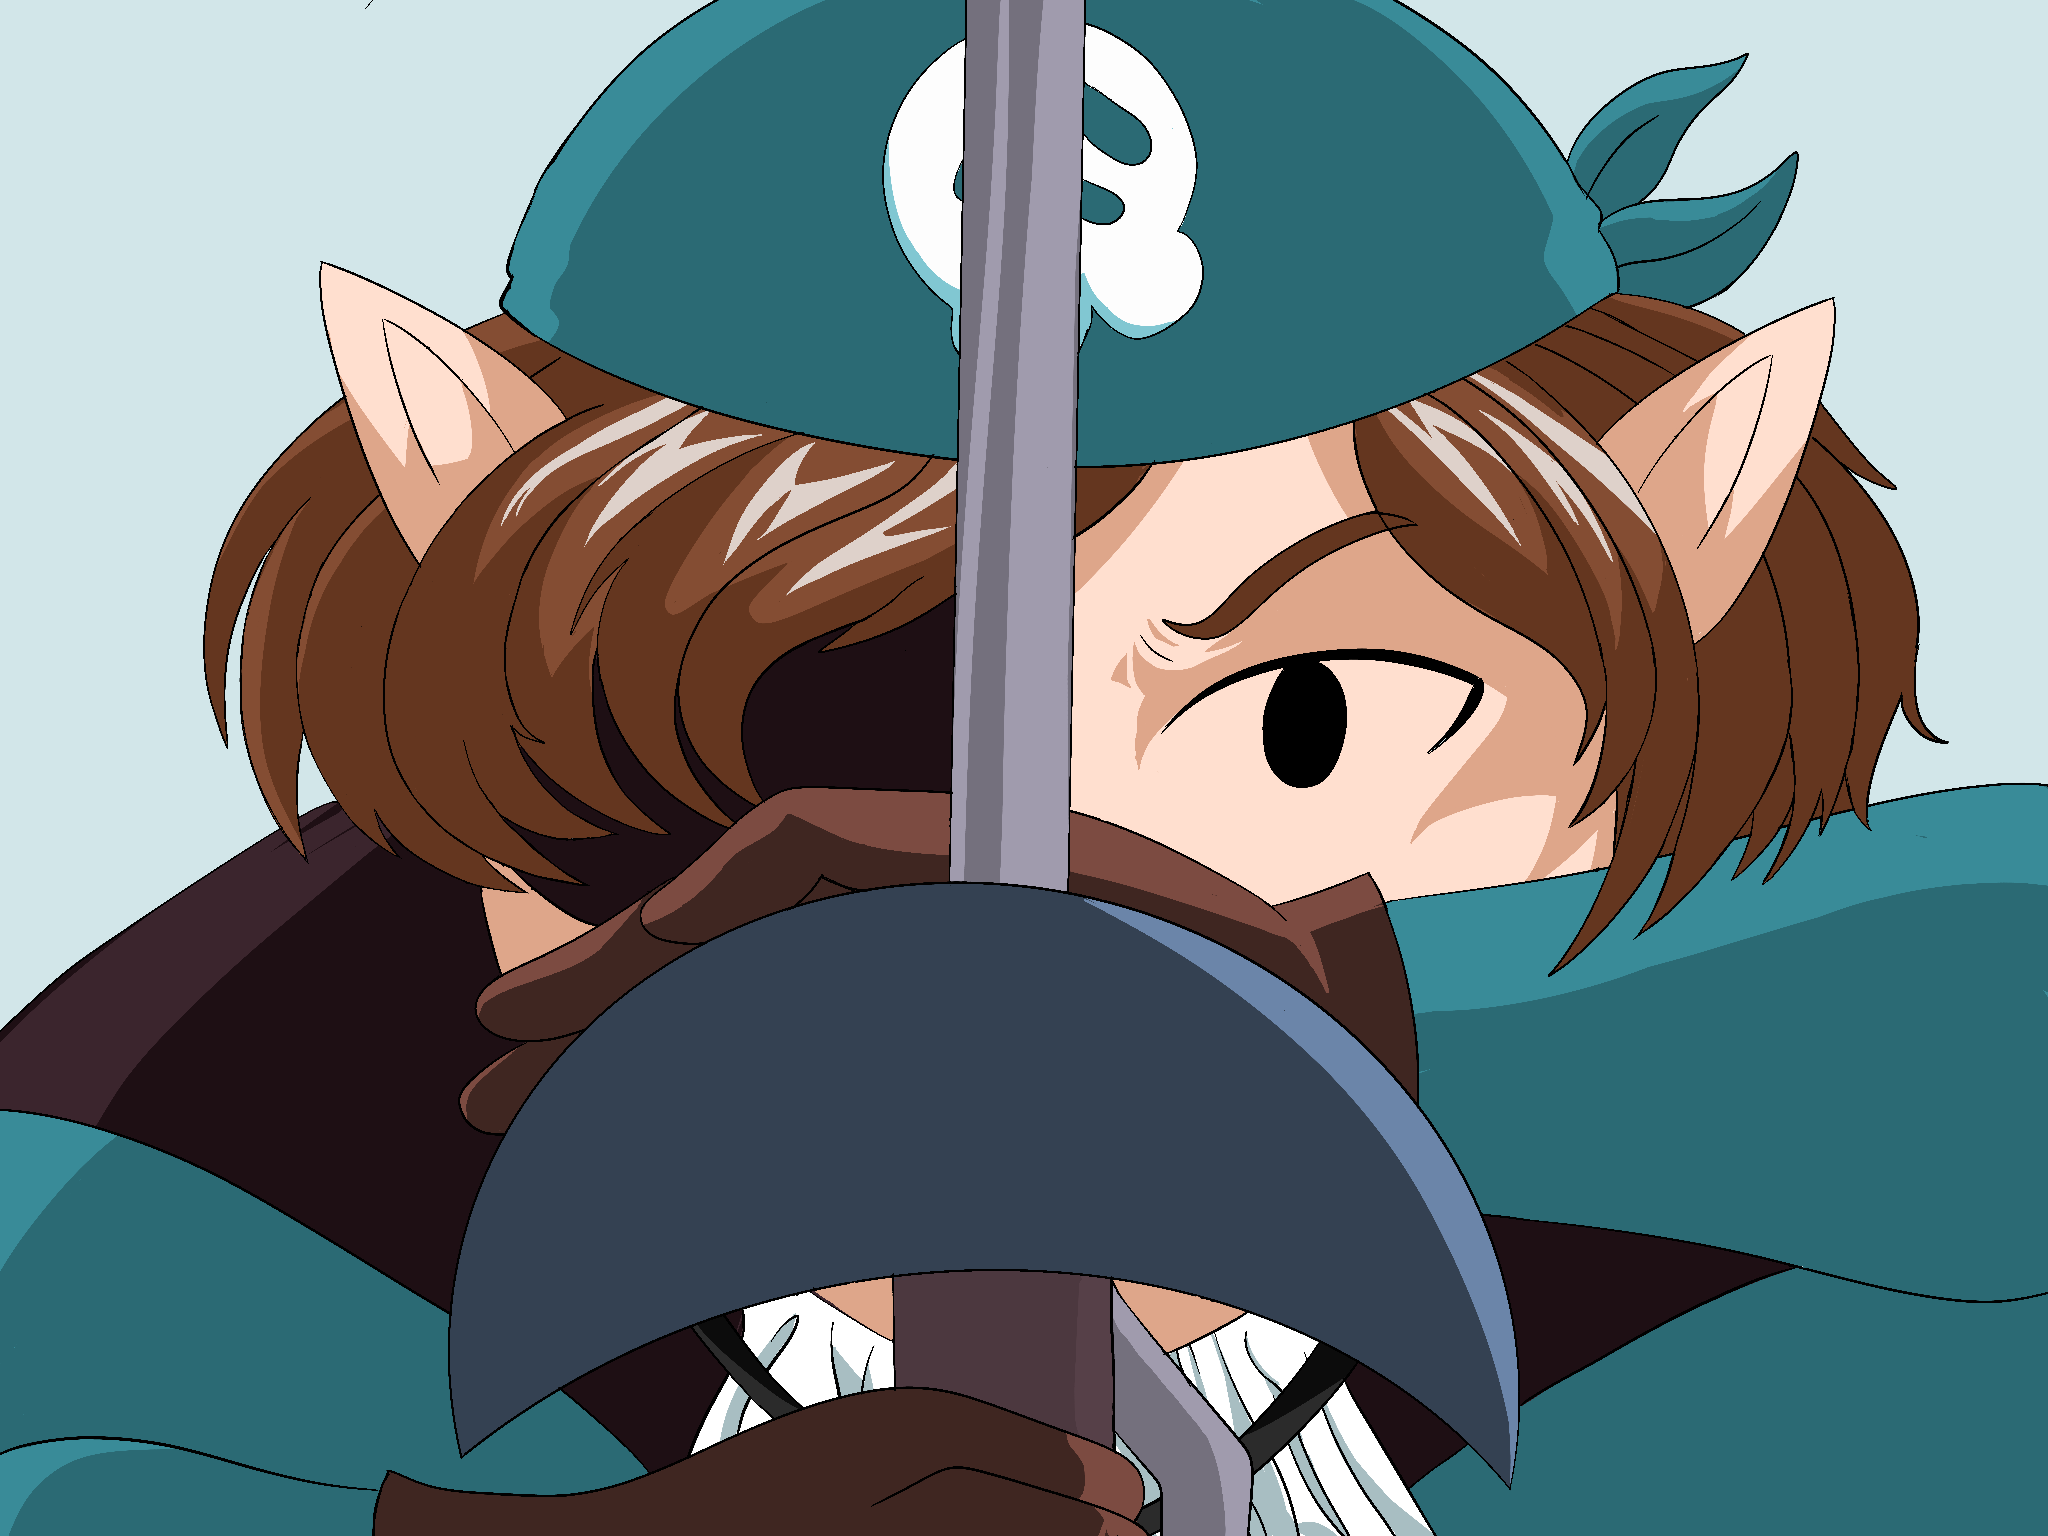 Like the previous image, Teal having a fierce expression as they wield thier saber. This time there is no faint glow on the blade.